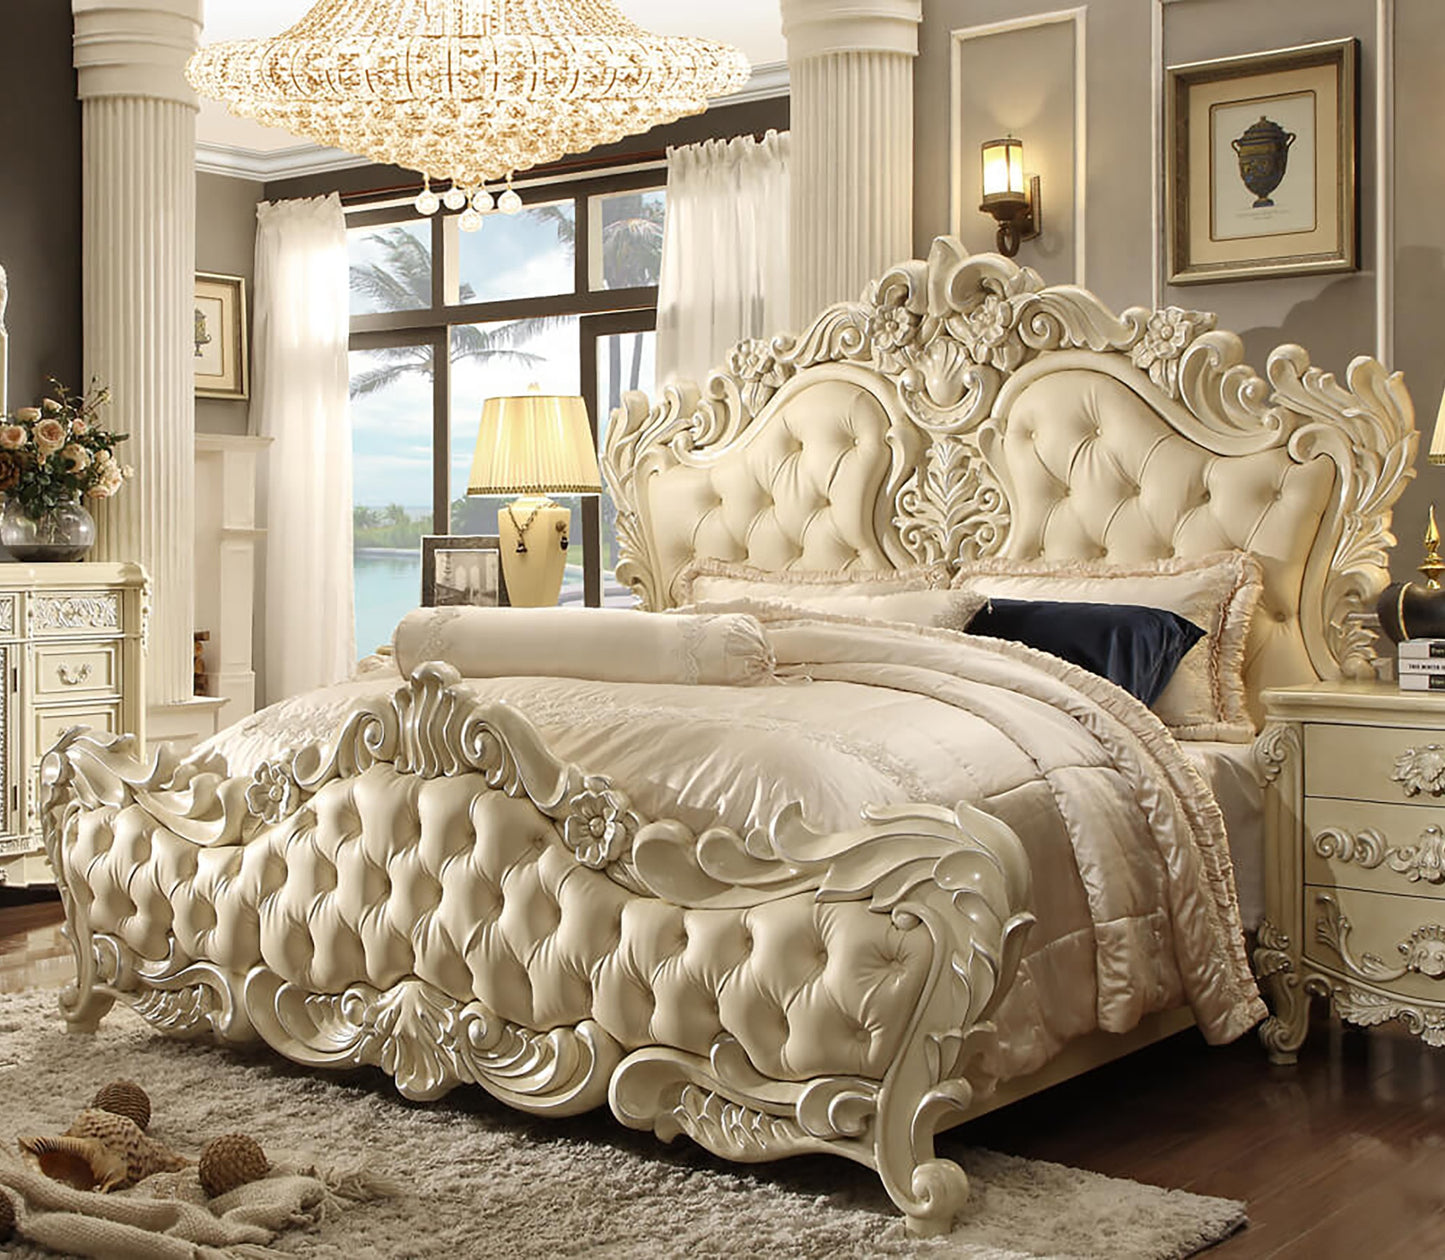 Leather Cal King Bed in Newberry Cream Finish CK5800 European Victorian